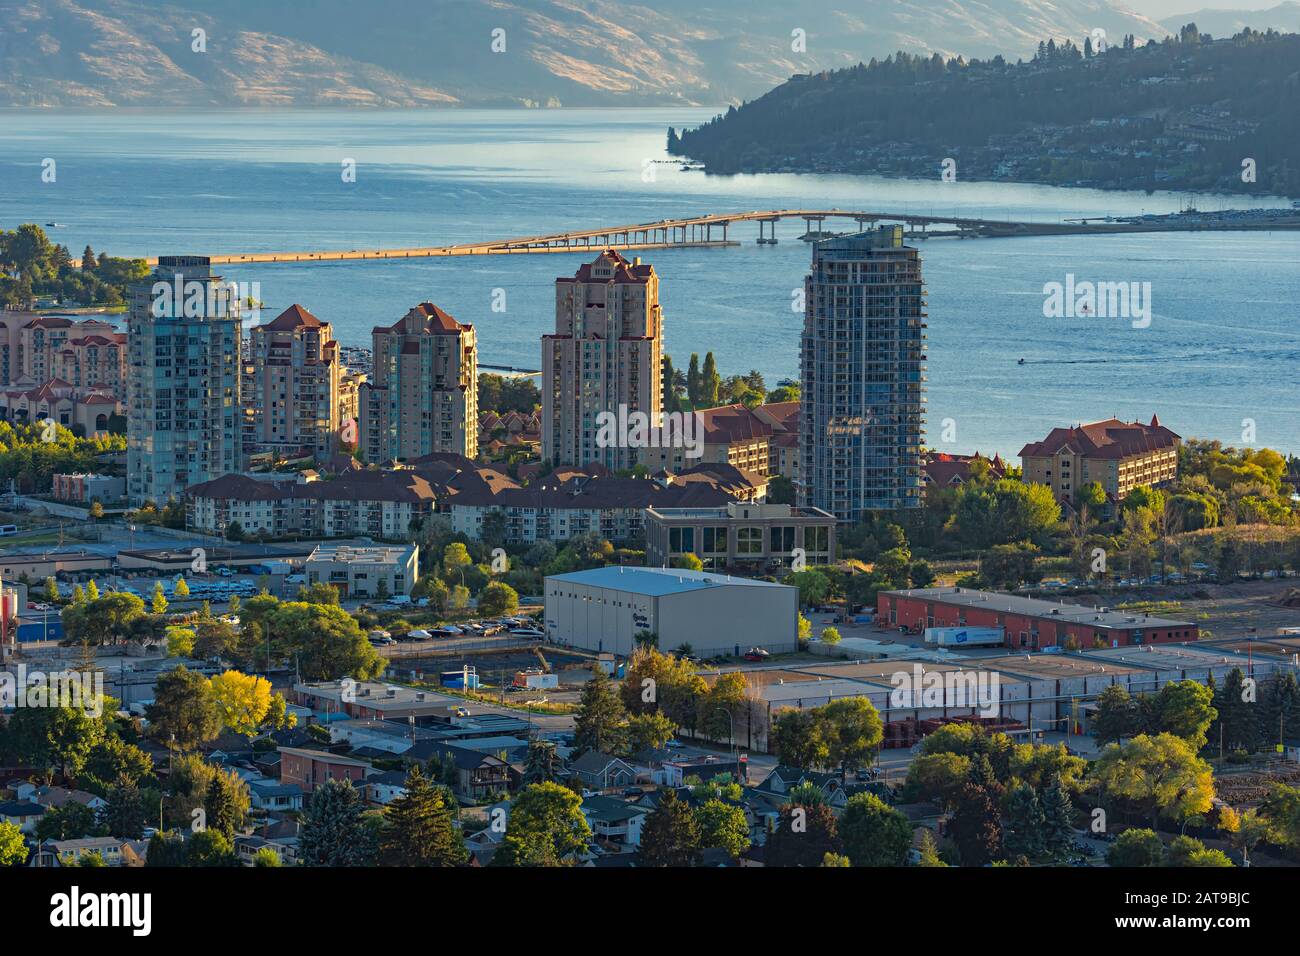 a view of the Kelowna British Columbia skyline and Okanagan Lake with the R W Bennett Bridge in the background from Knox Mountain at sunset Stock Photo